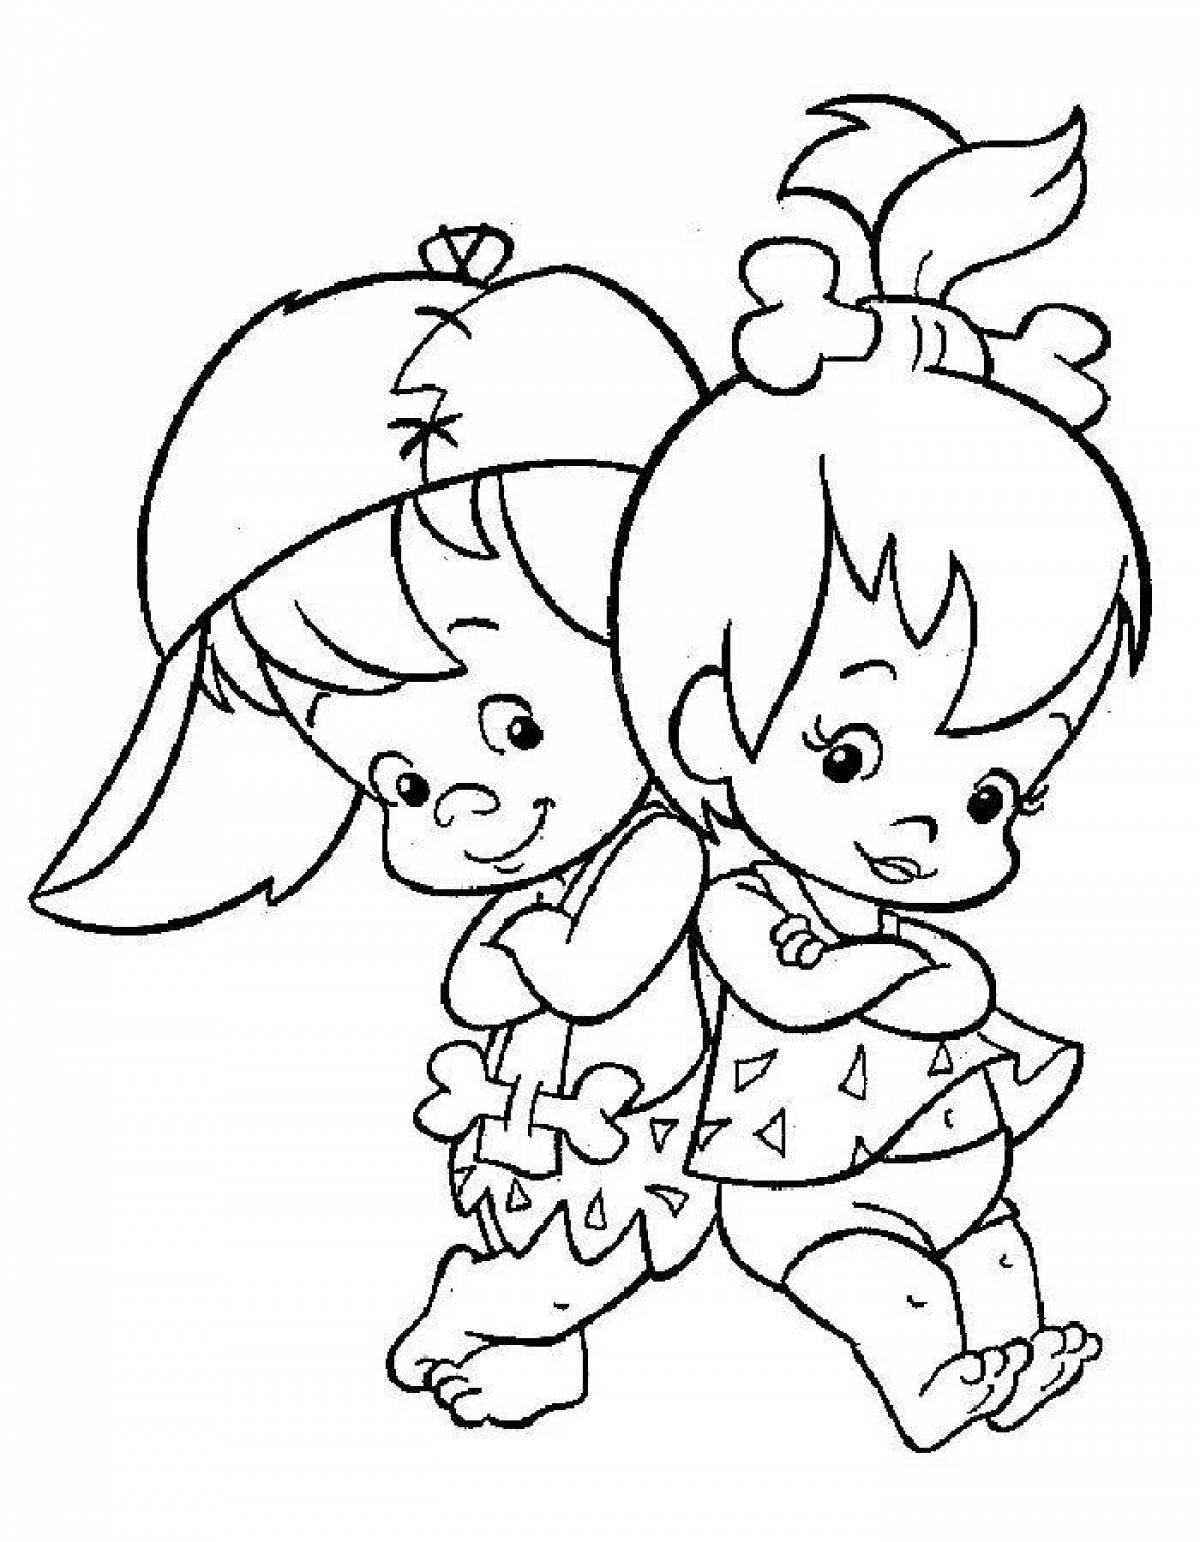 Color Explosion Coloring Page for 4-5 year old boys